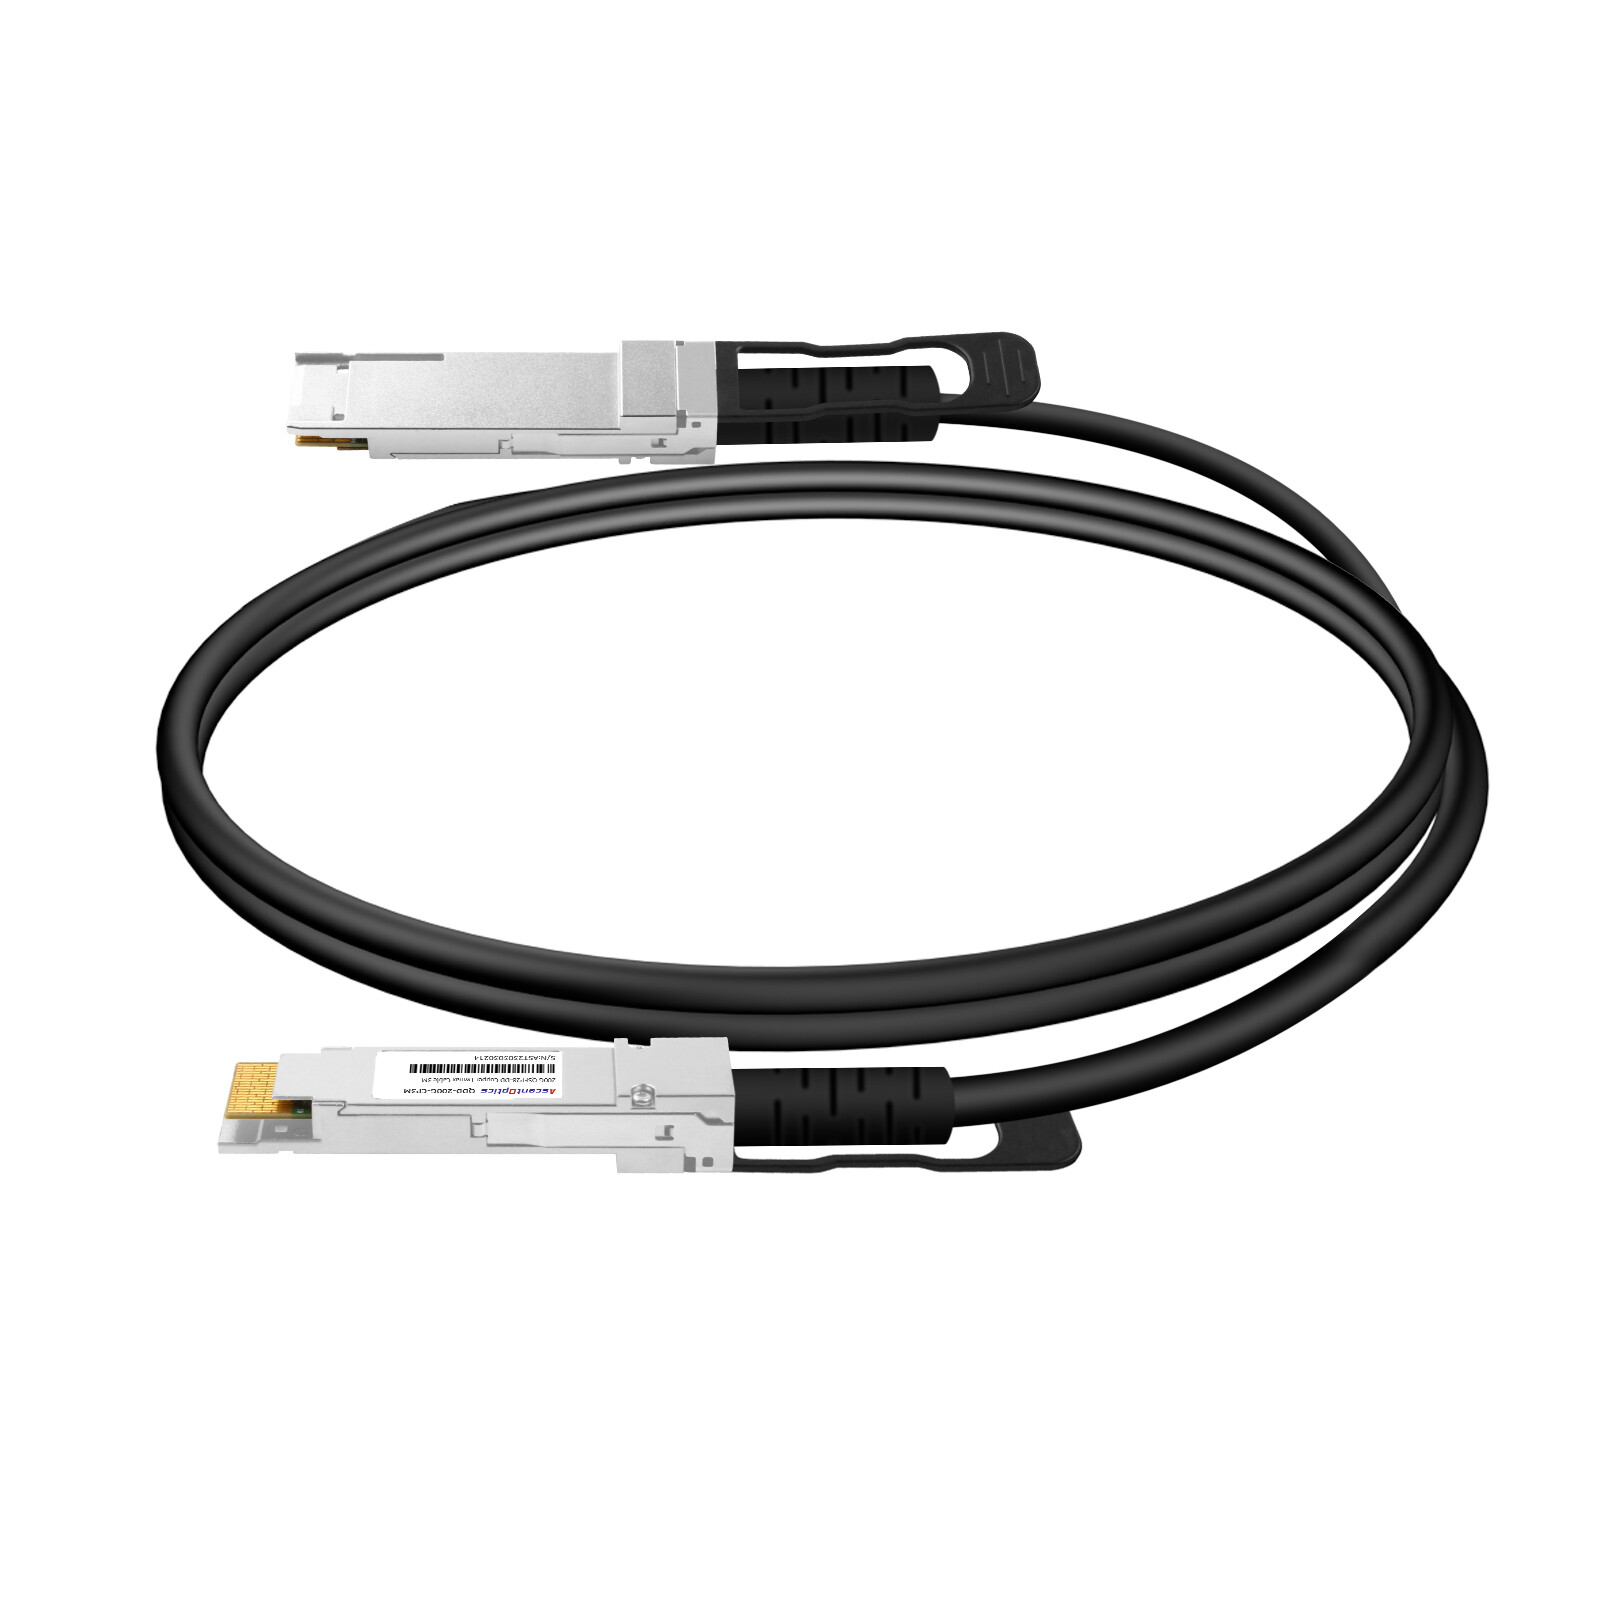 200G QSFP28-DD Copper DAC Cable,3 Meters,Passive